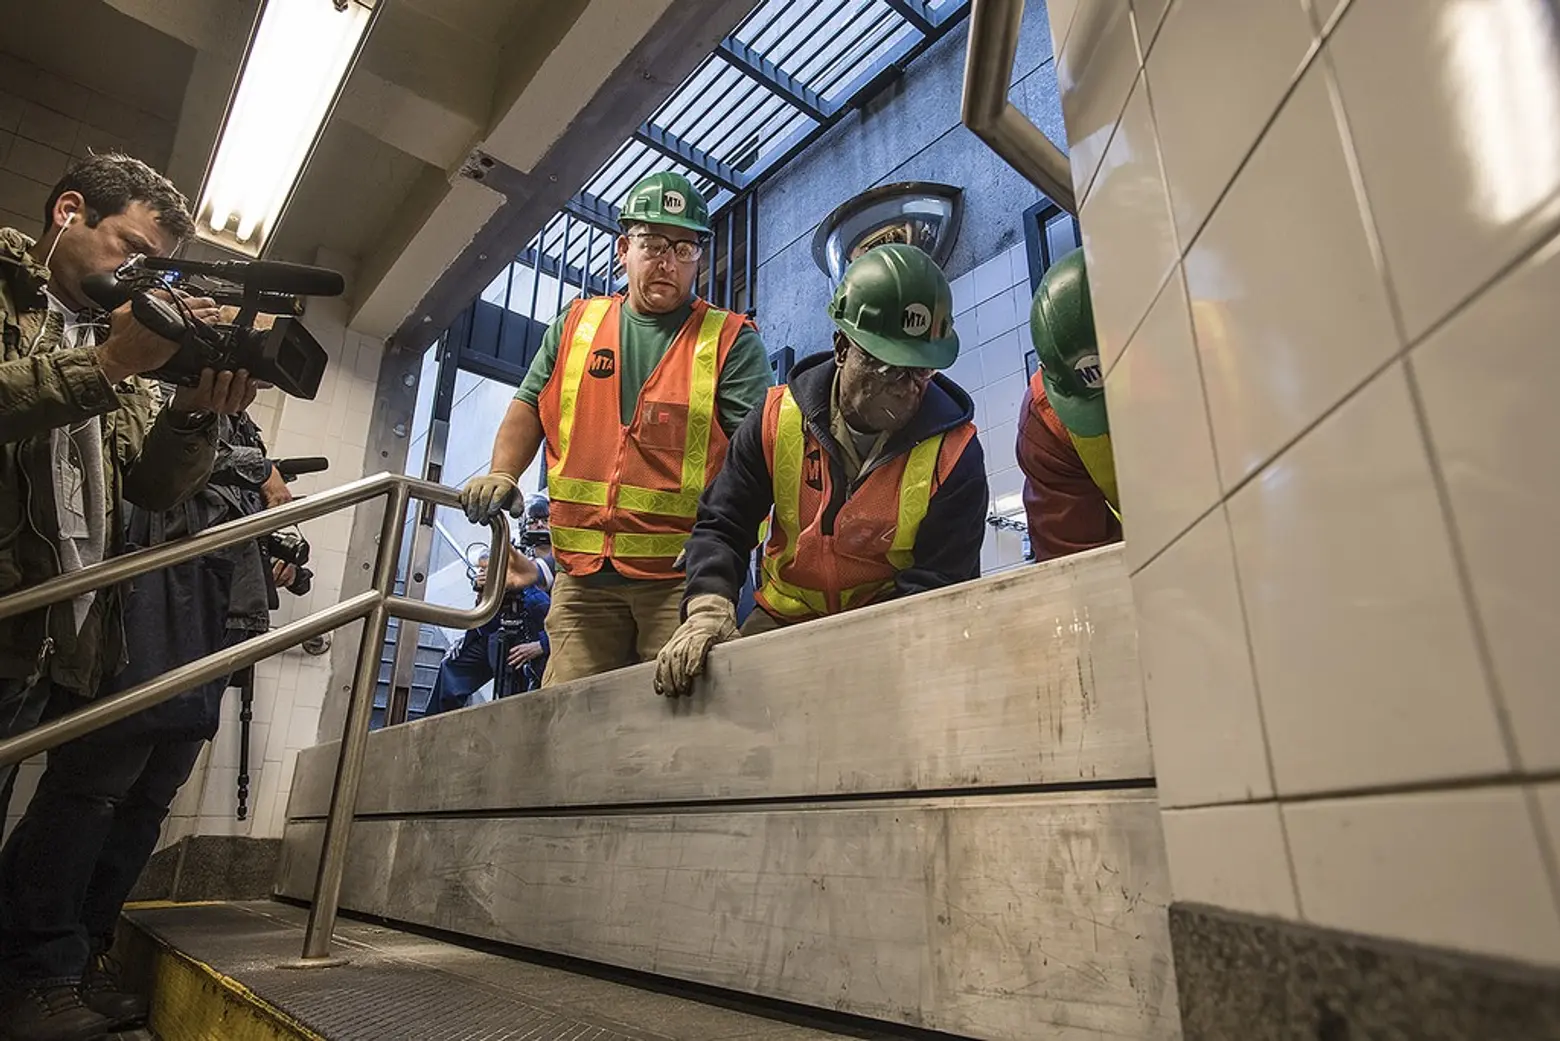 MTA to install flood-proof doors at subway stations